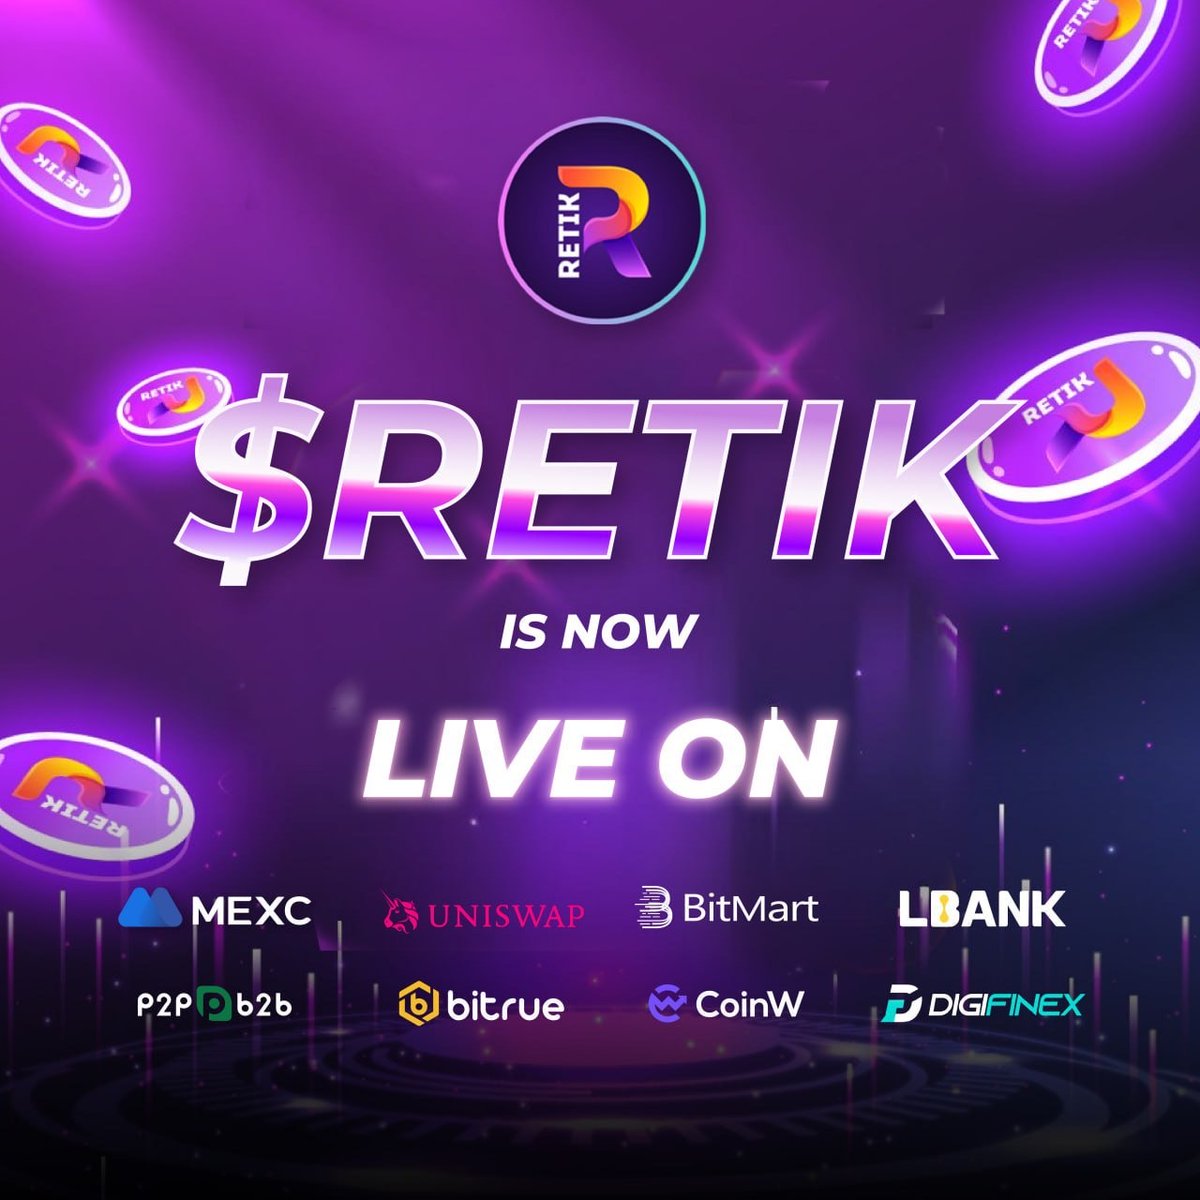 🚀 Ready to transform your financial world? Dive into Retik Finance! 🌟Launching on the 21 May with a crazy following base , multiple exchange listings and a 32 Million $ raise! 🔹 DeFi Debit Cards: Spend crypto globally, online or offline, with no KYC! 🔹 Smart Crypto Payment